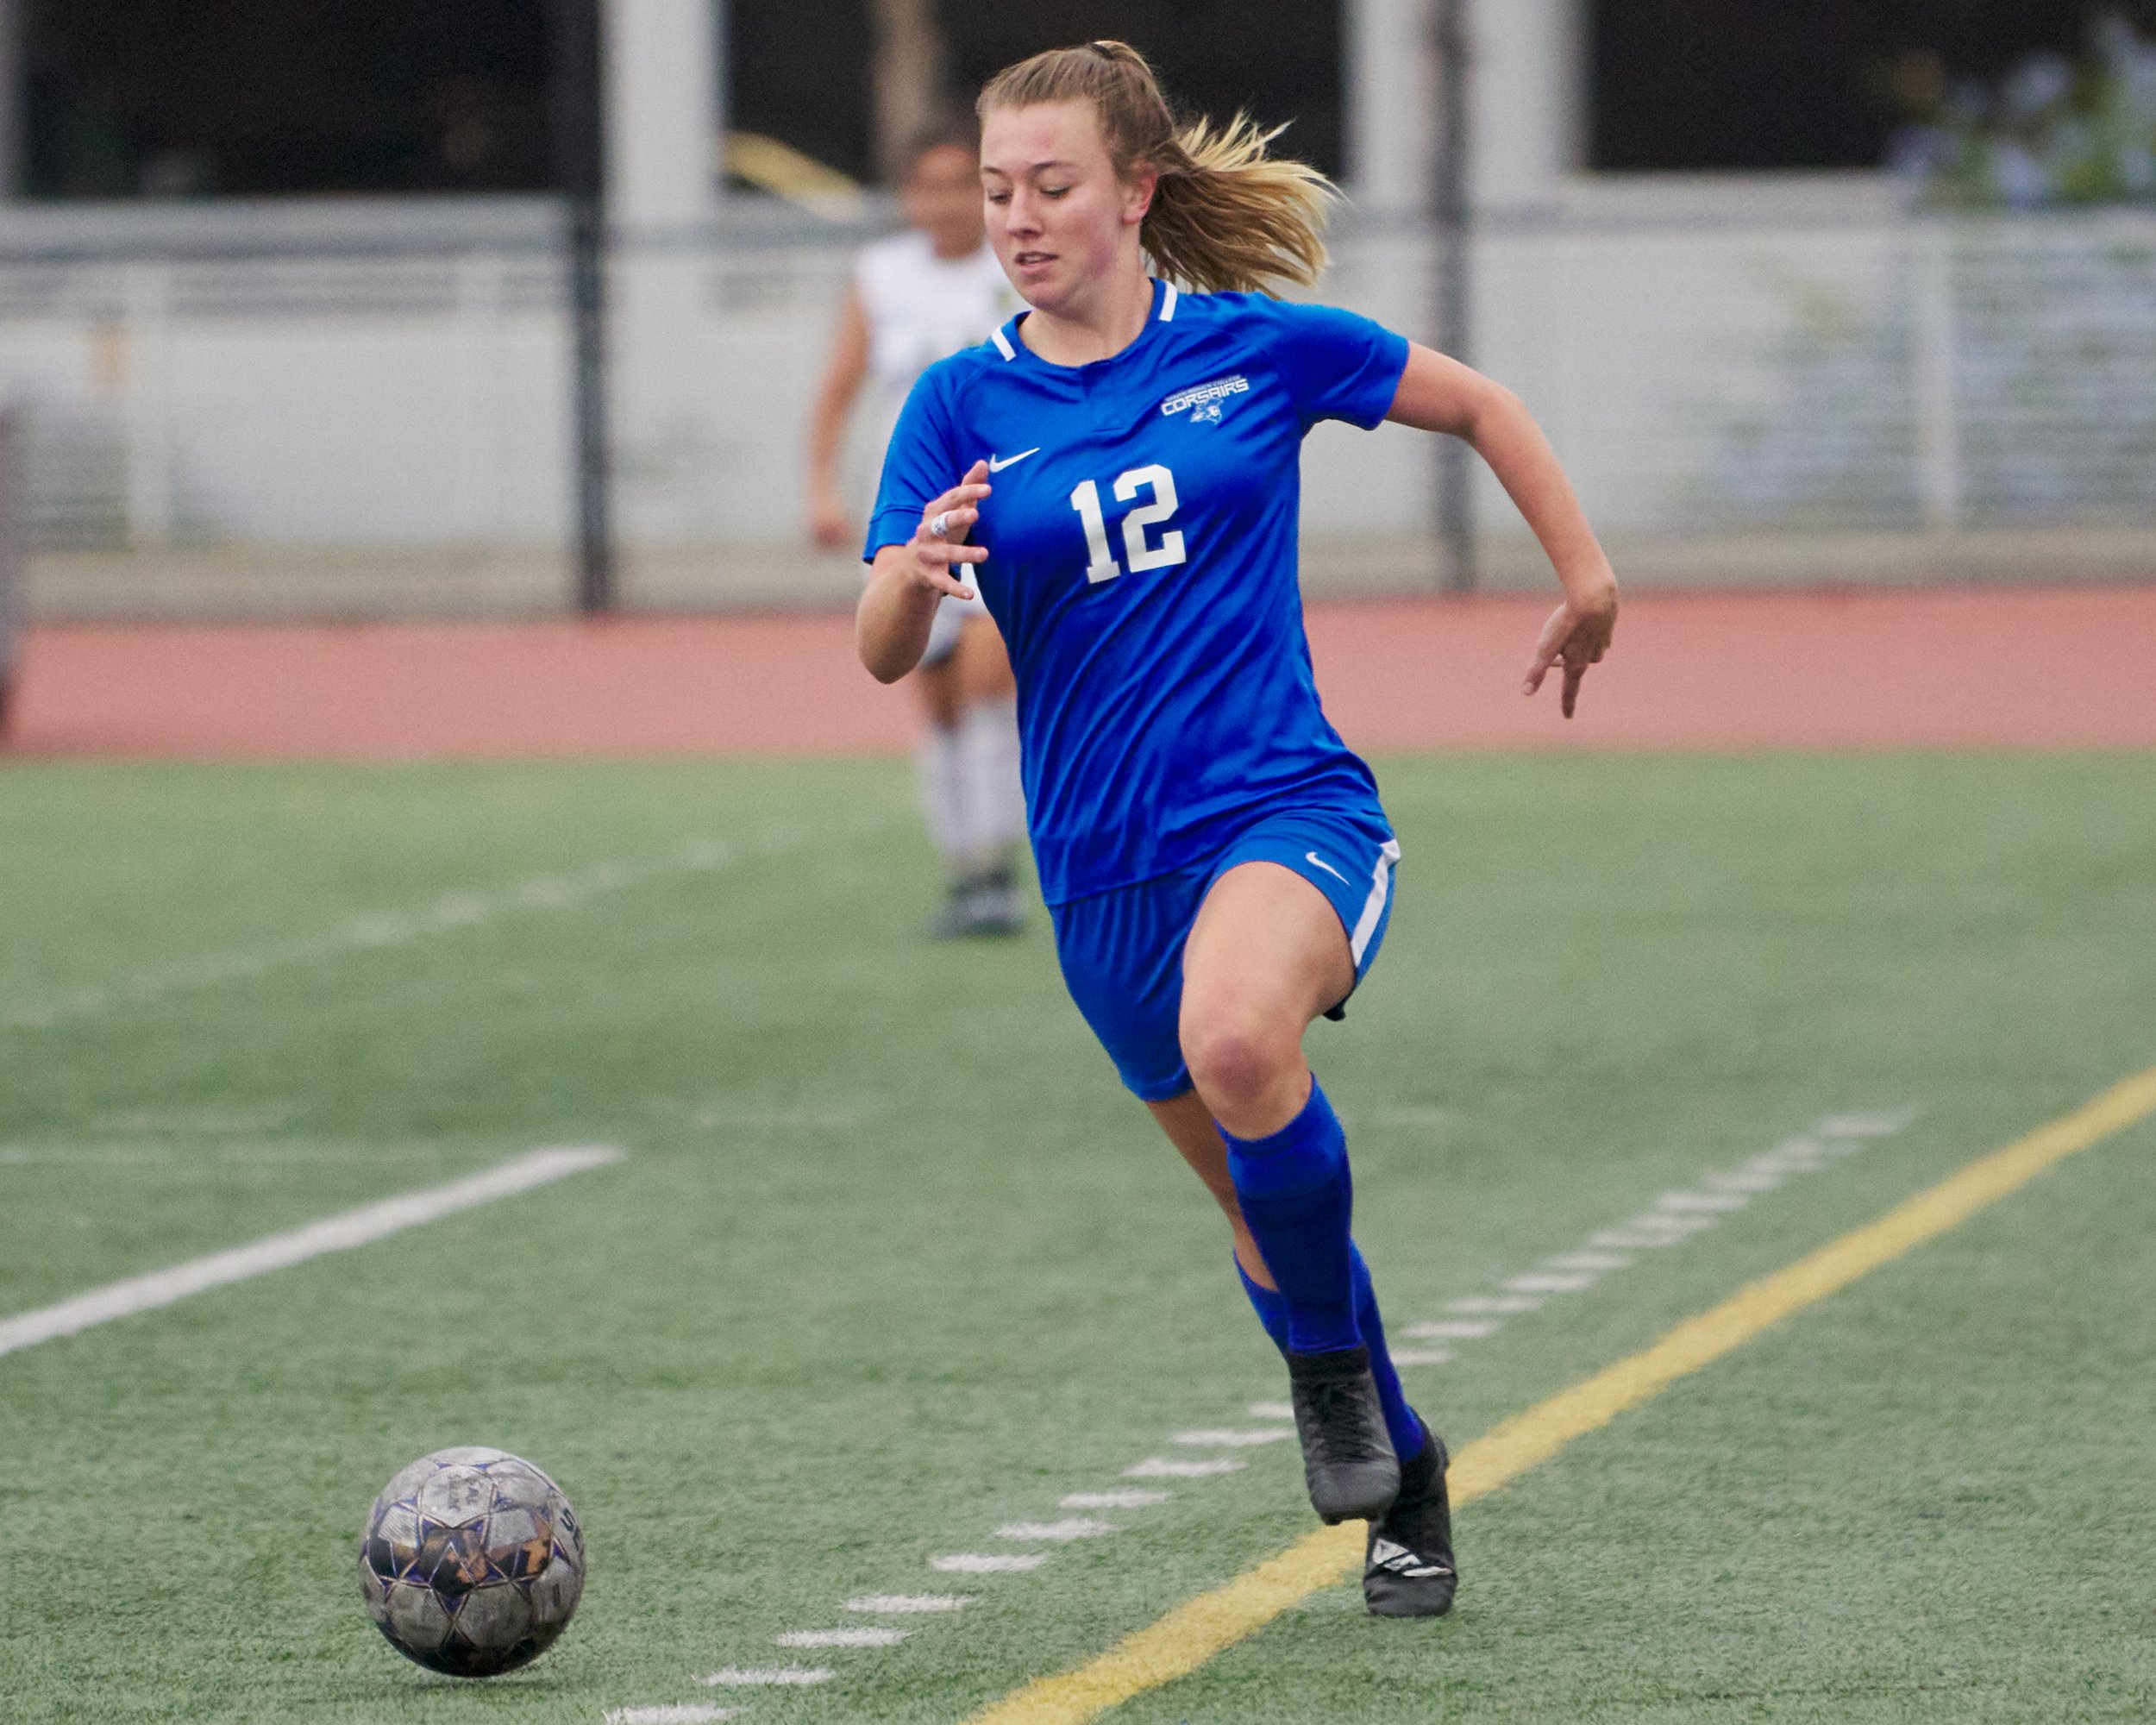  Santa Monica College Corsairs' Eden Hotch during the women's soccer match against the Los Angeles Valley College Monarchs on Tuesday, Nov. 1, 2022, at Corsair Field in Santa Monica, Calif. The Corsairs won 2-1. (Nicholas McCall | The Corsair) 